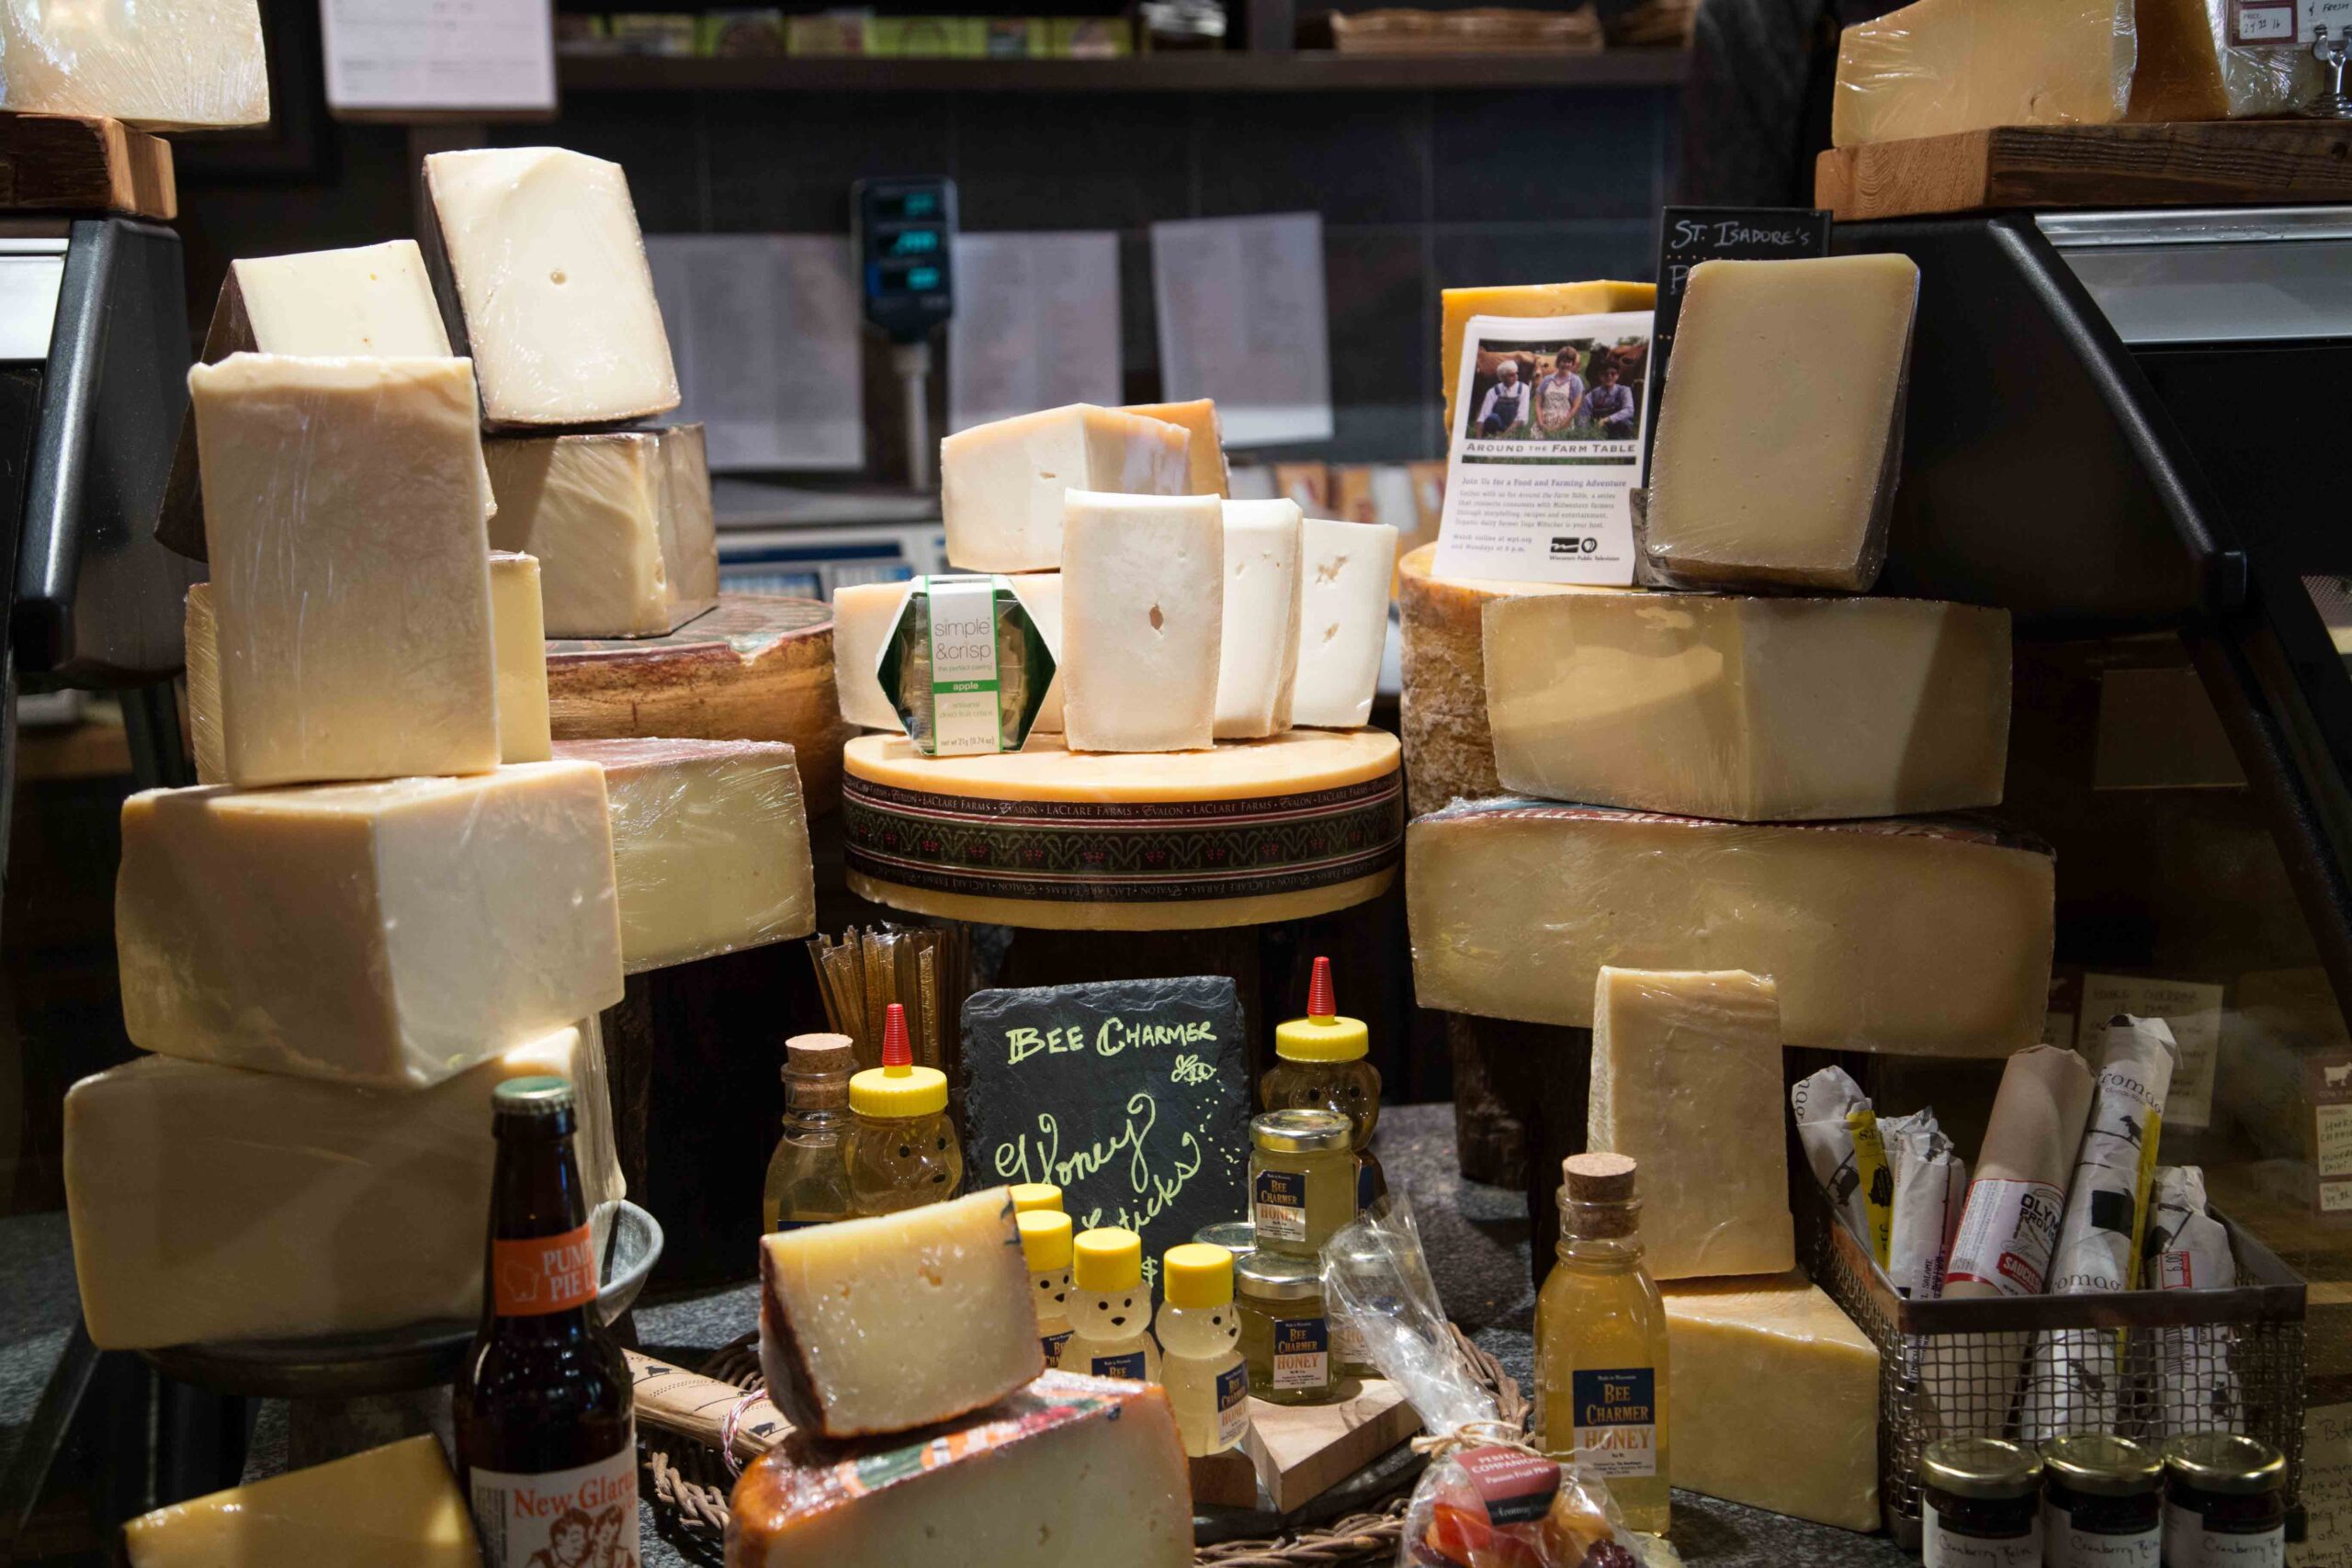 Fromagination cheese counter